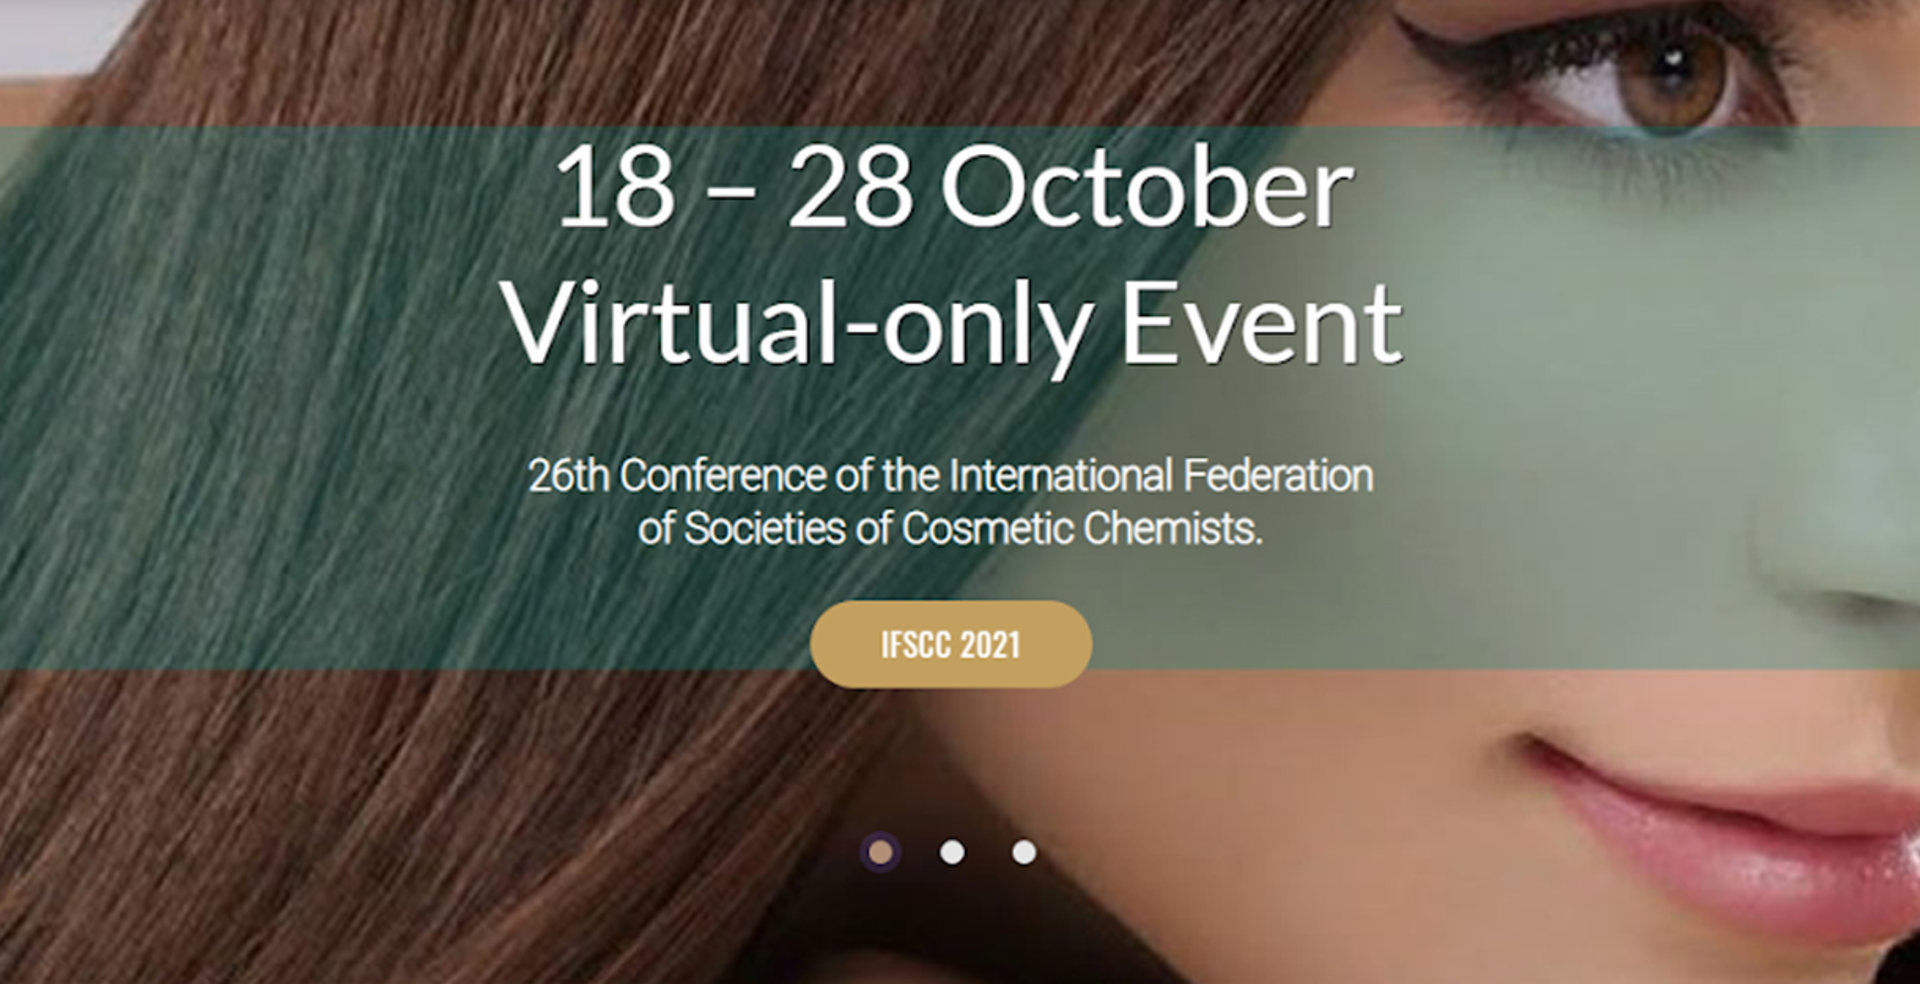 26th Conference of the International Federation of Societies of Cosmetic Chemists, IFSCC Mexico conference,  virtual event from 18-28 October 2021